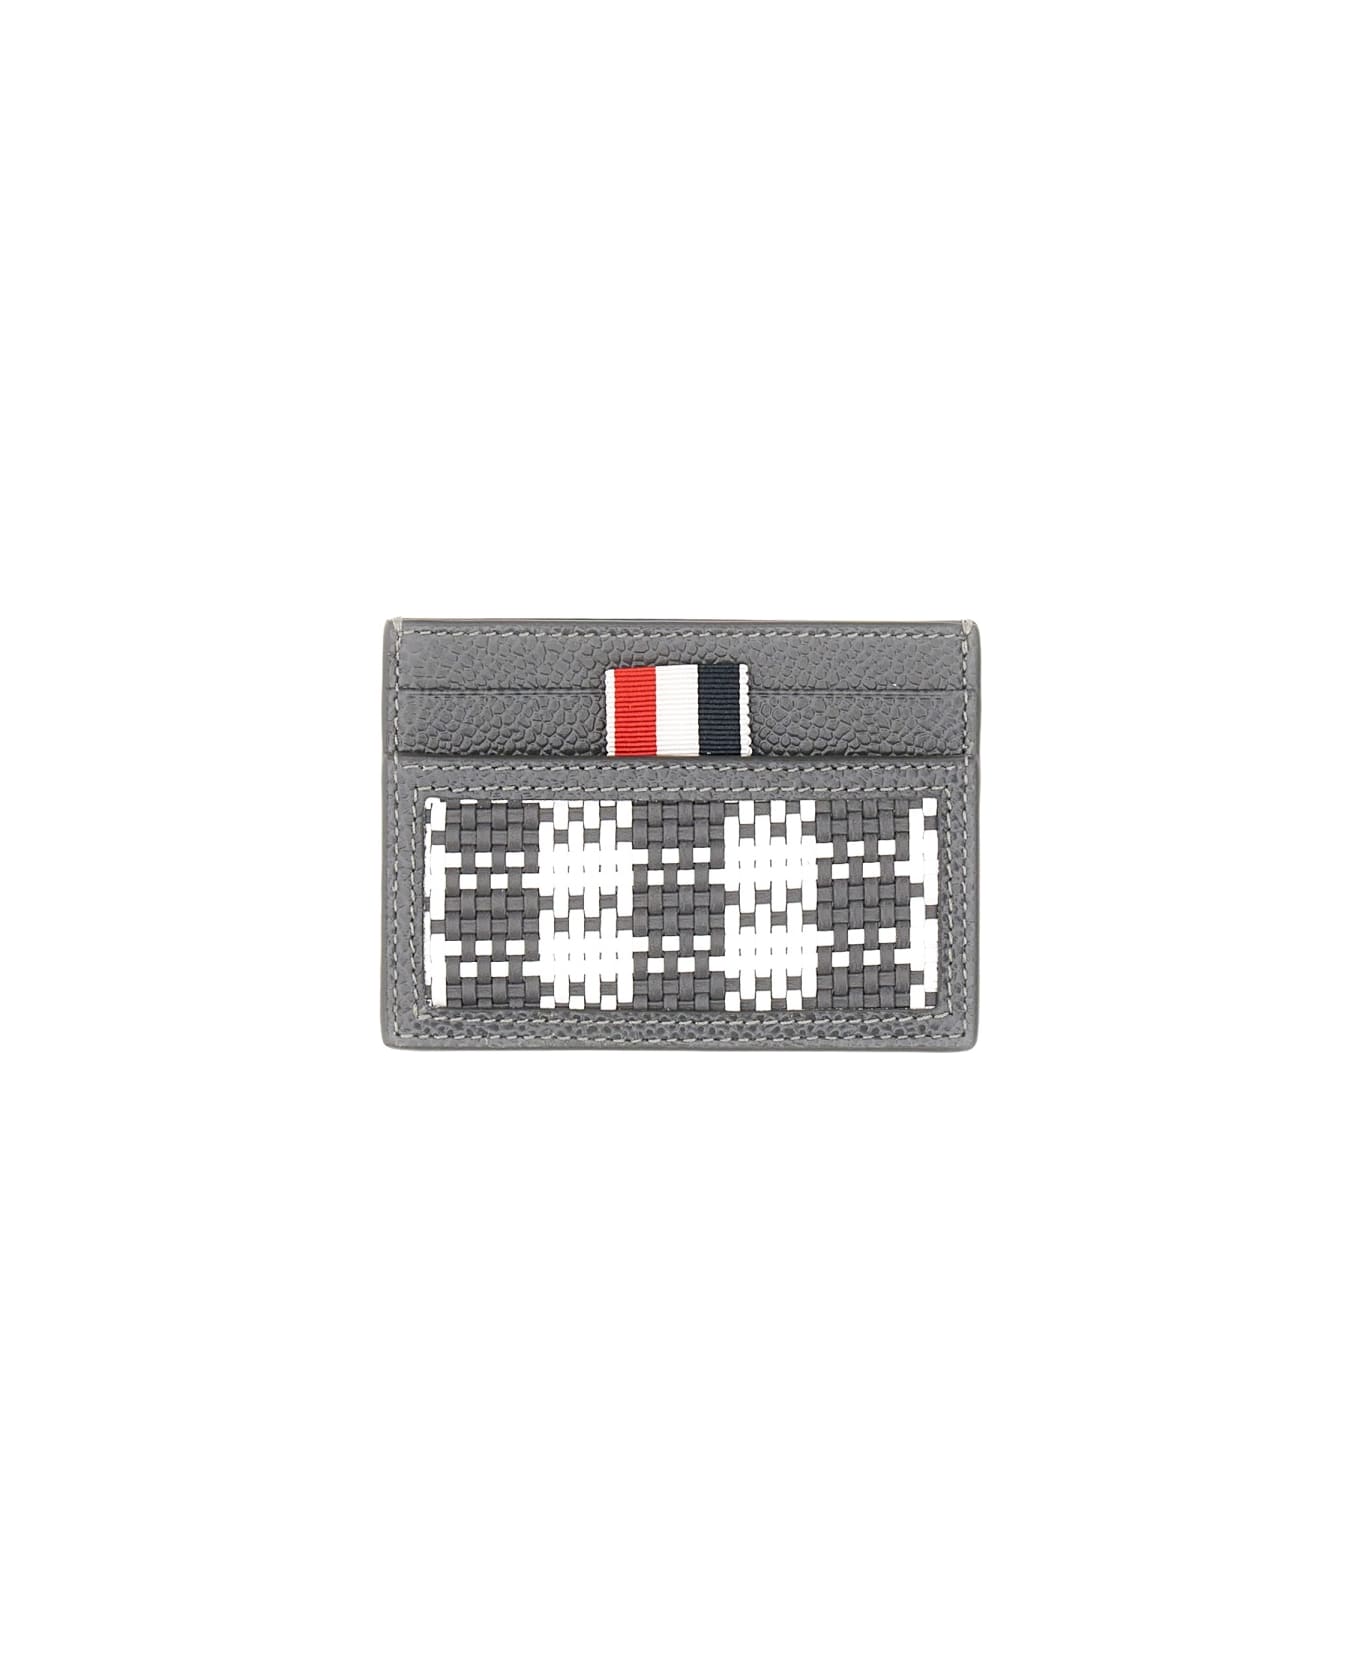 Thom Browne Woven Leather Card Case - GREY